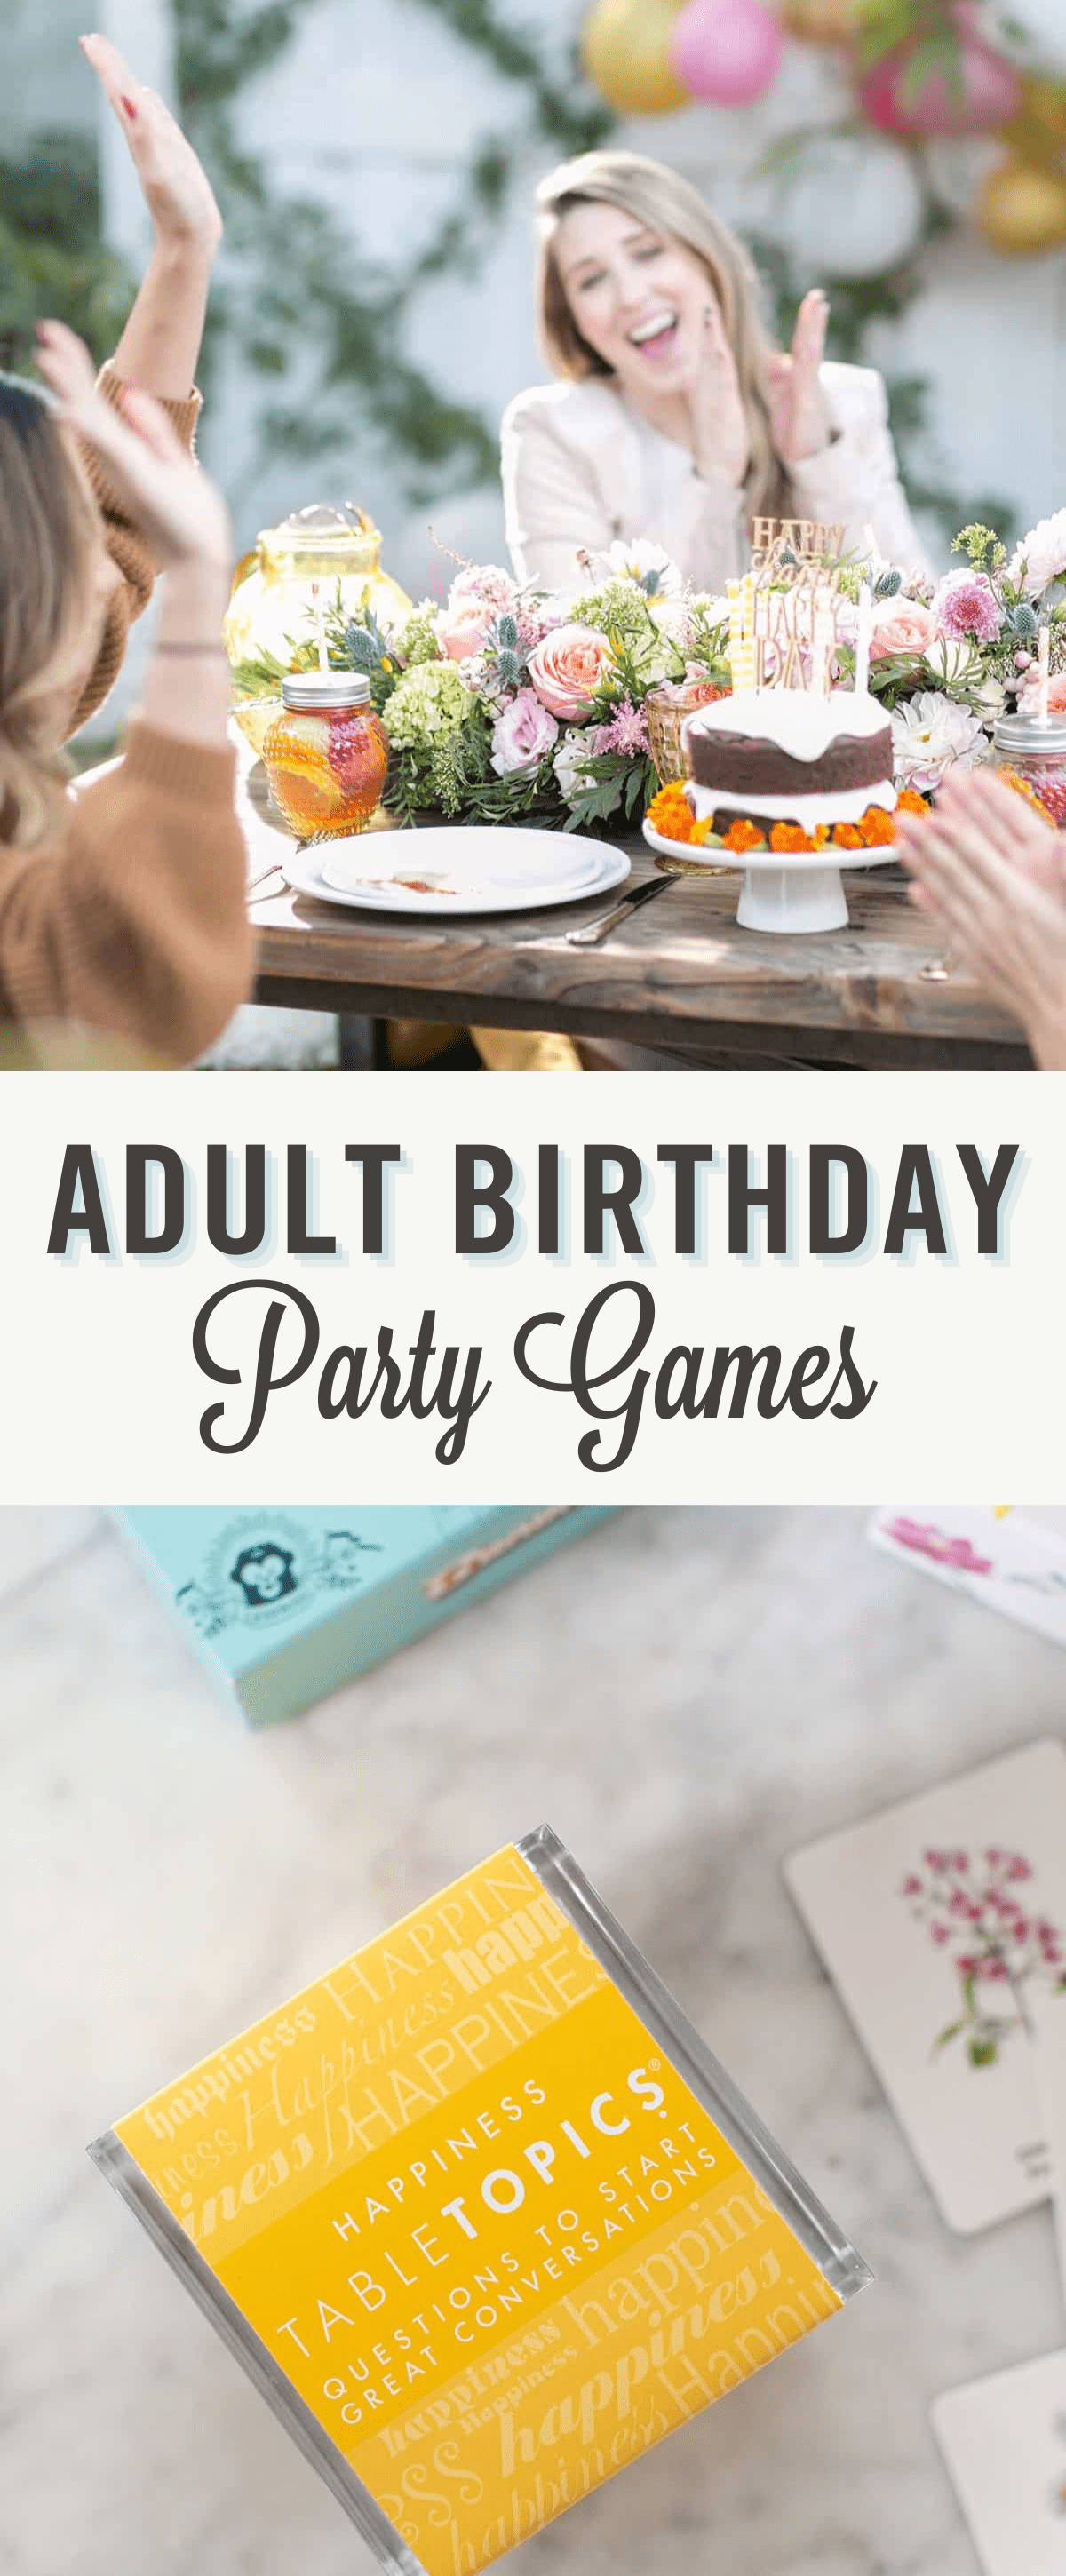 Adult birthday party games.